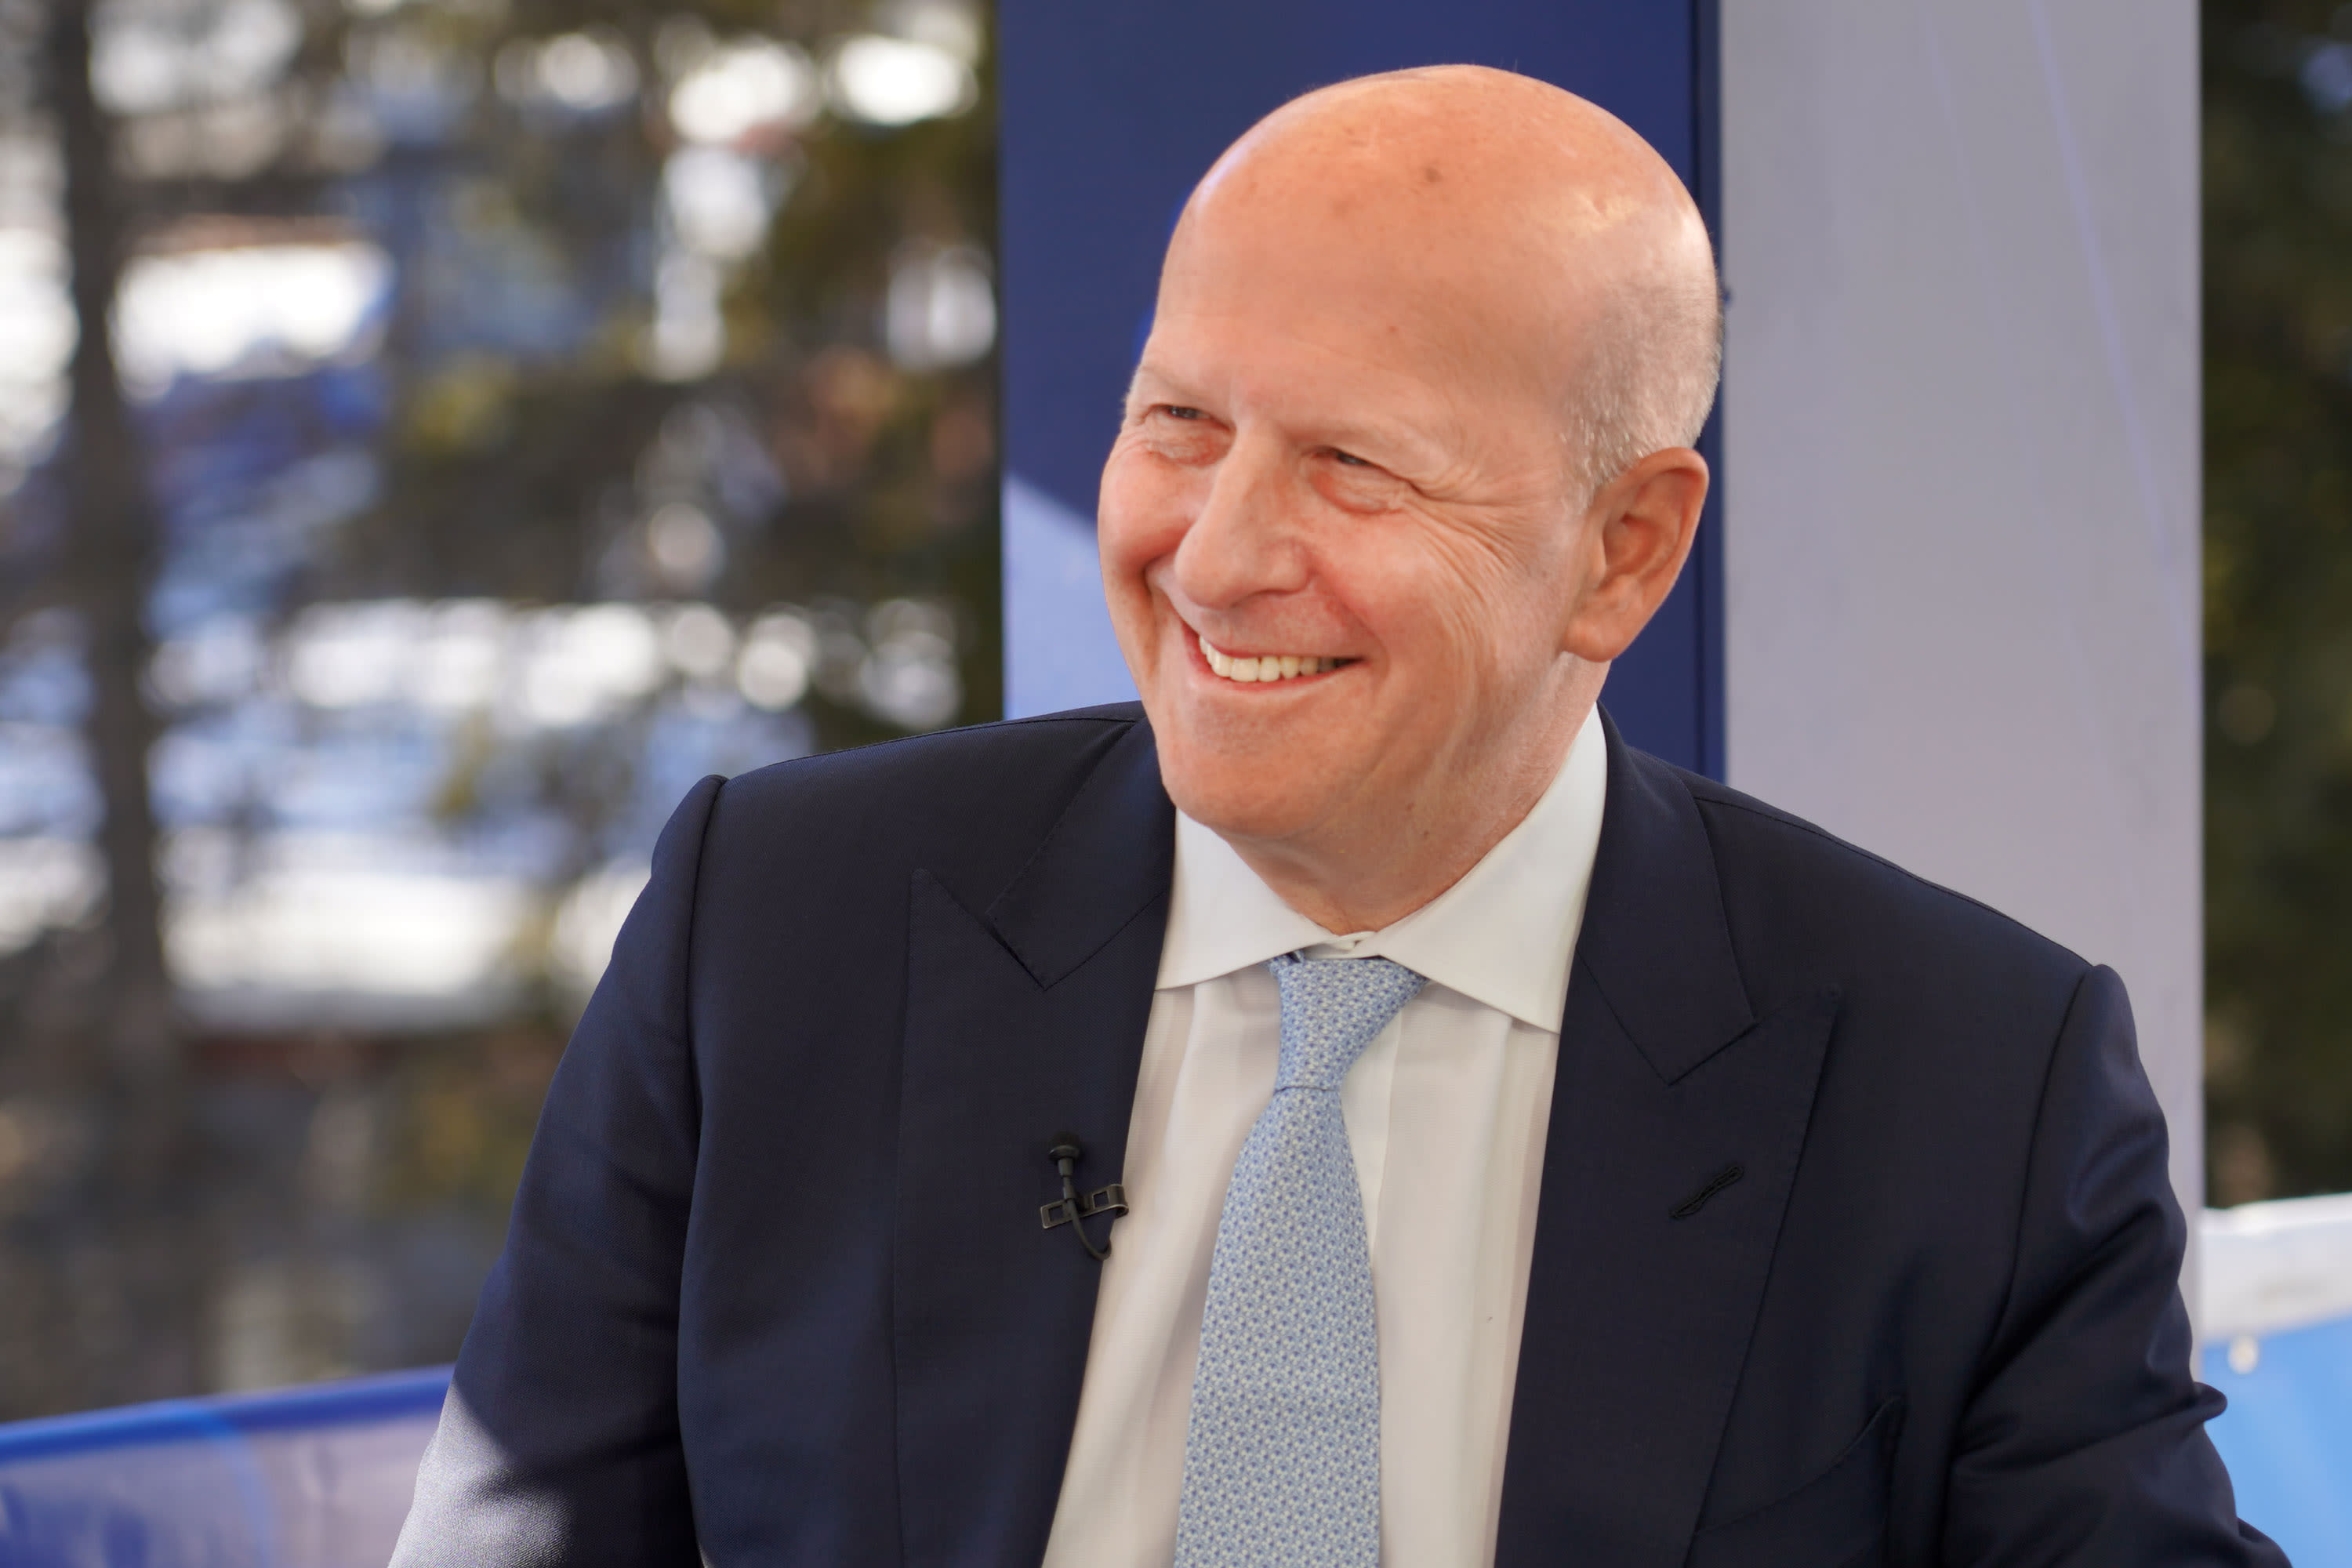 Goldman CEO Solomon sees policy, not the pandemic, as the biggest risk ahead for markets